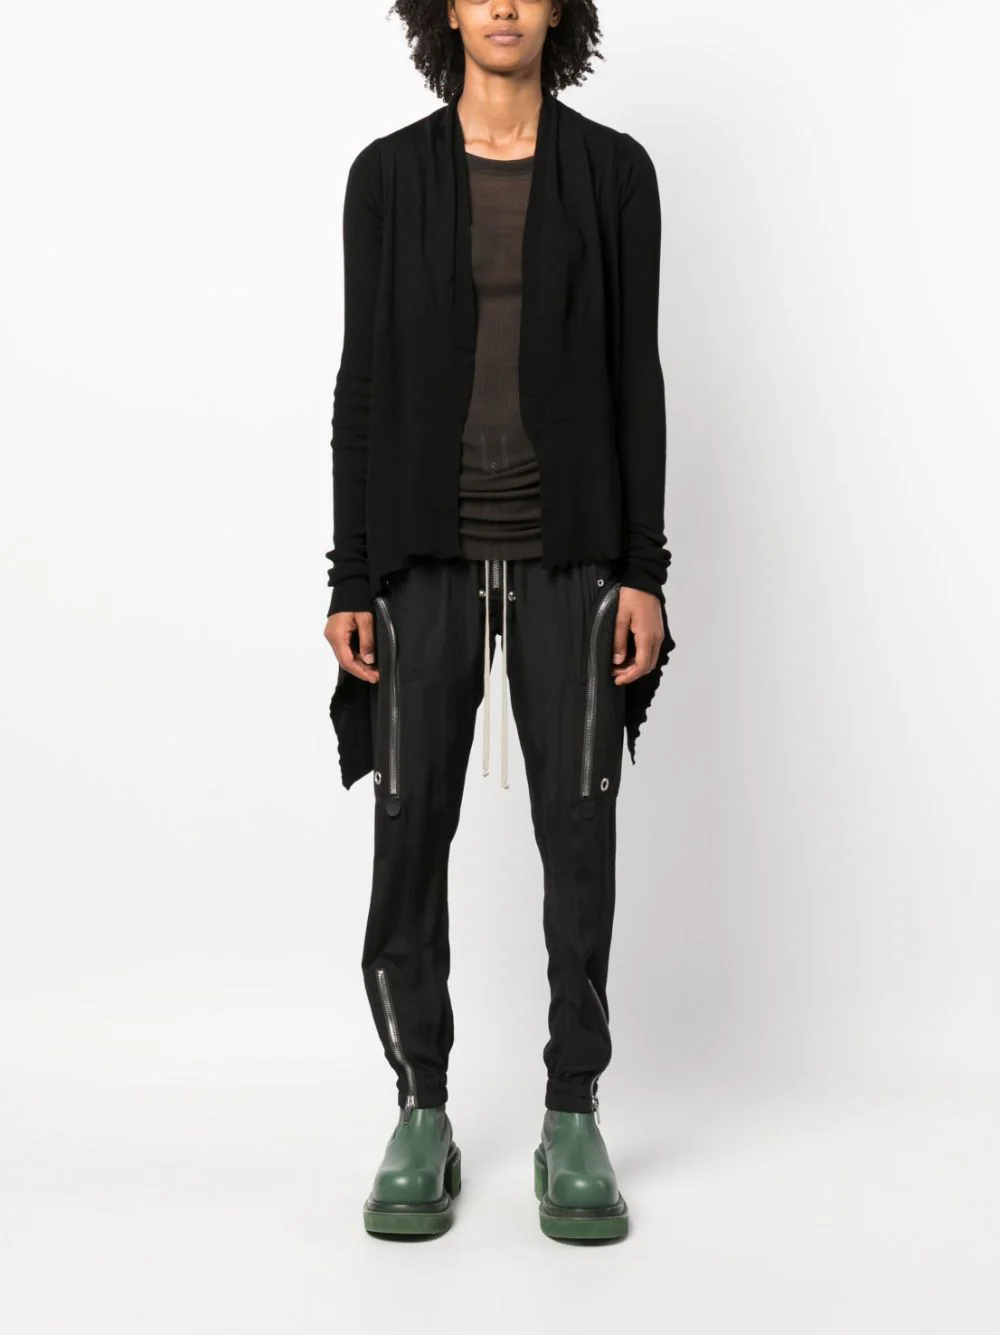 RICK OWENS – Page 2 – Atelier New York